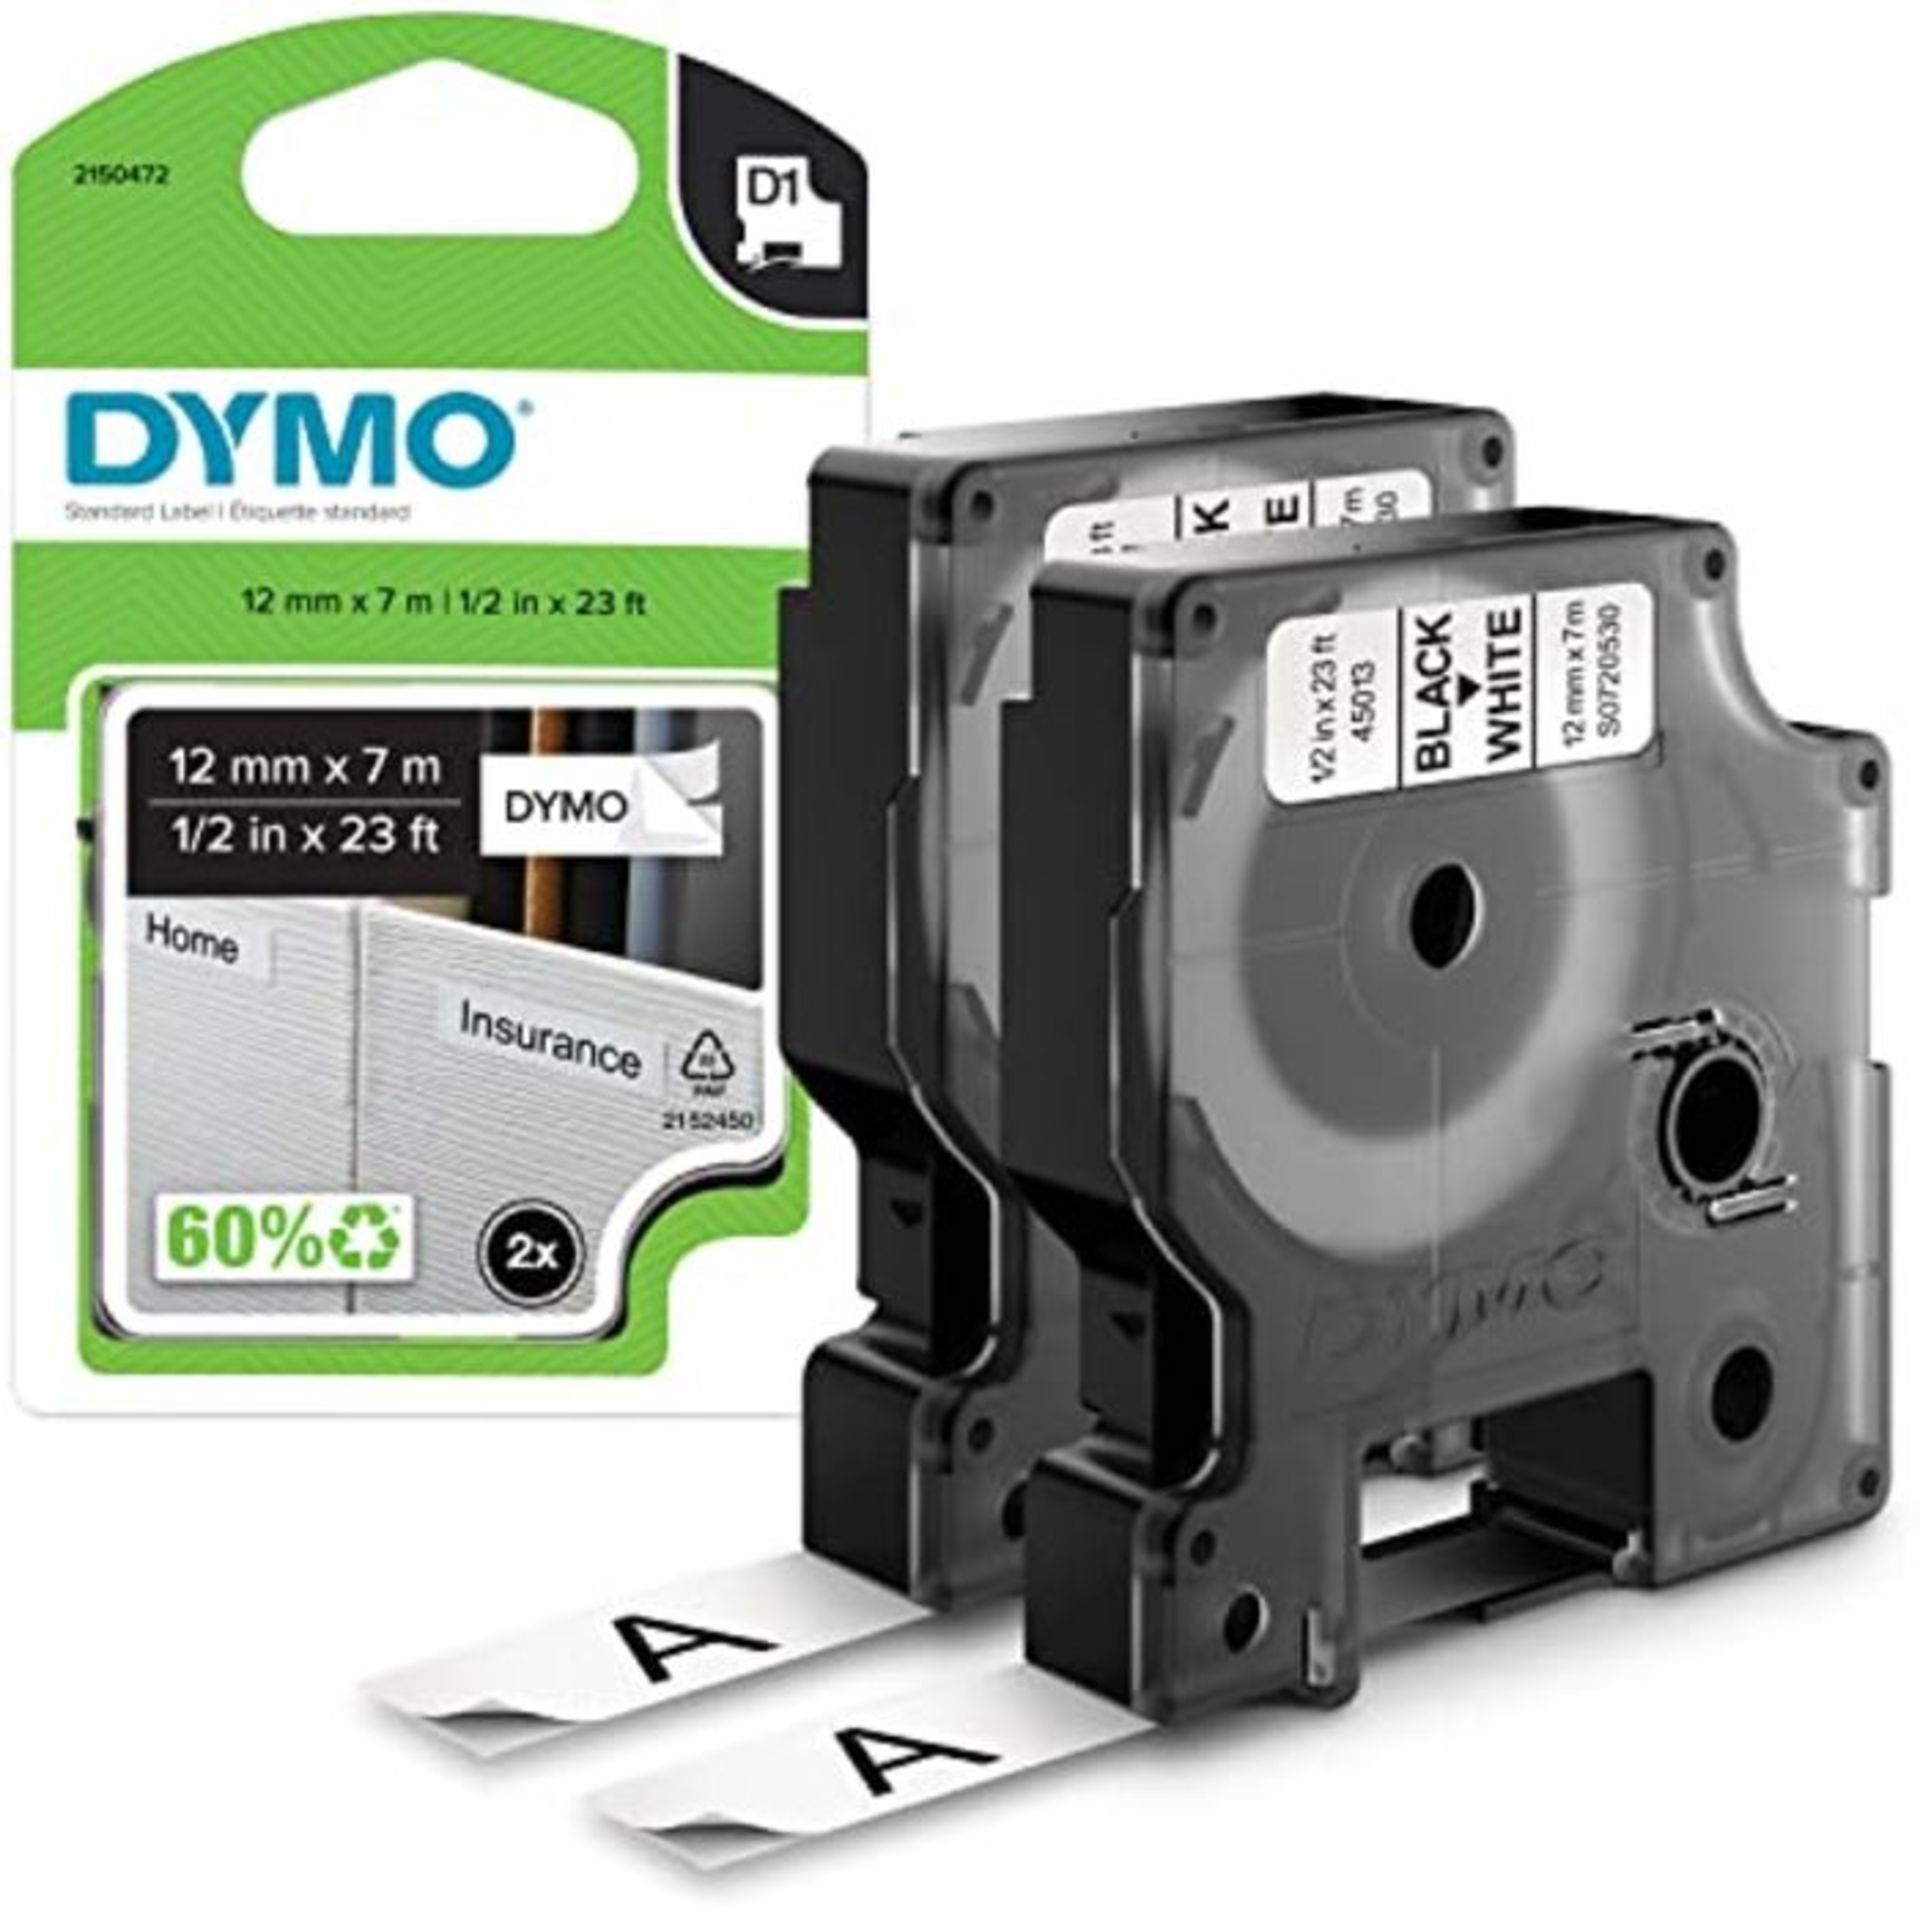 DYMO Authentic D1 Labels, Black Print on White, 12mm x 7m, Self-Adhesive Labels for La